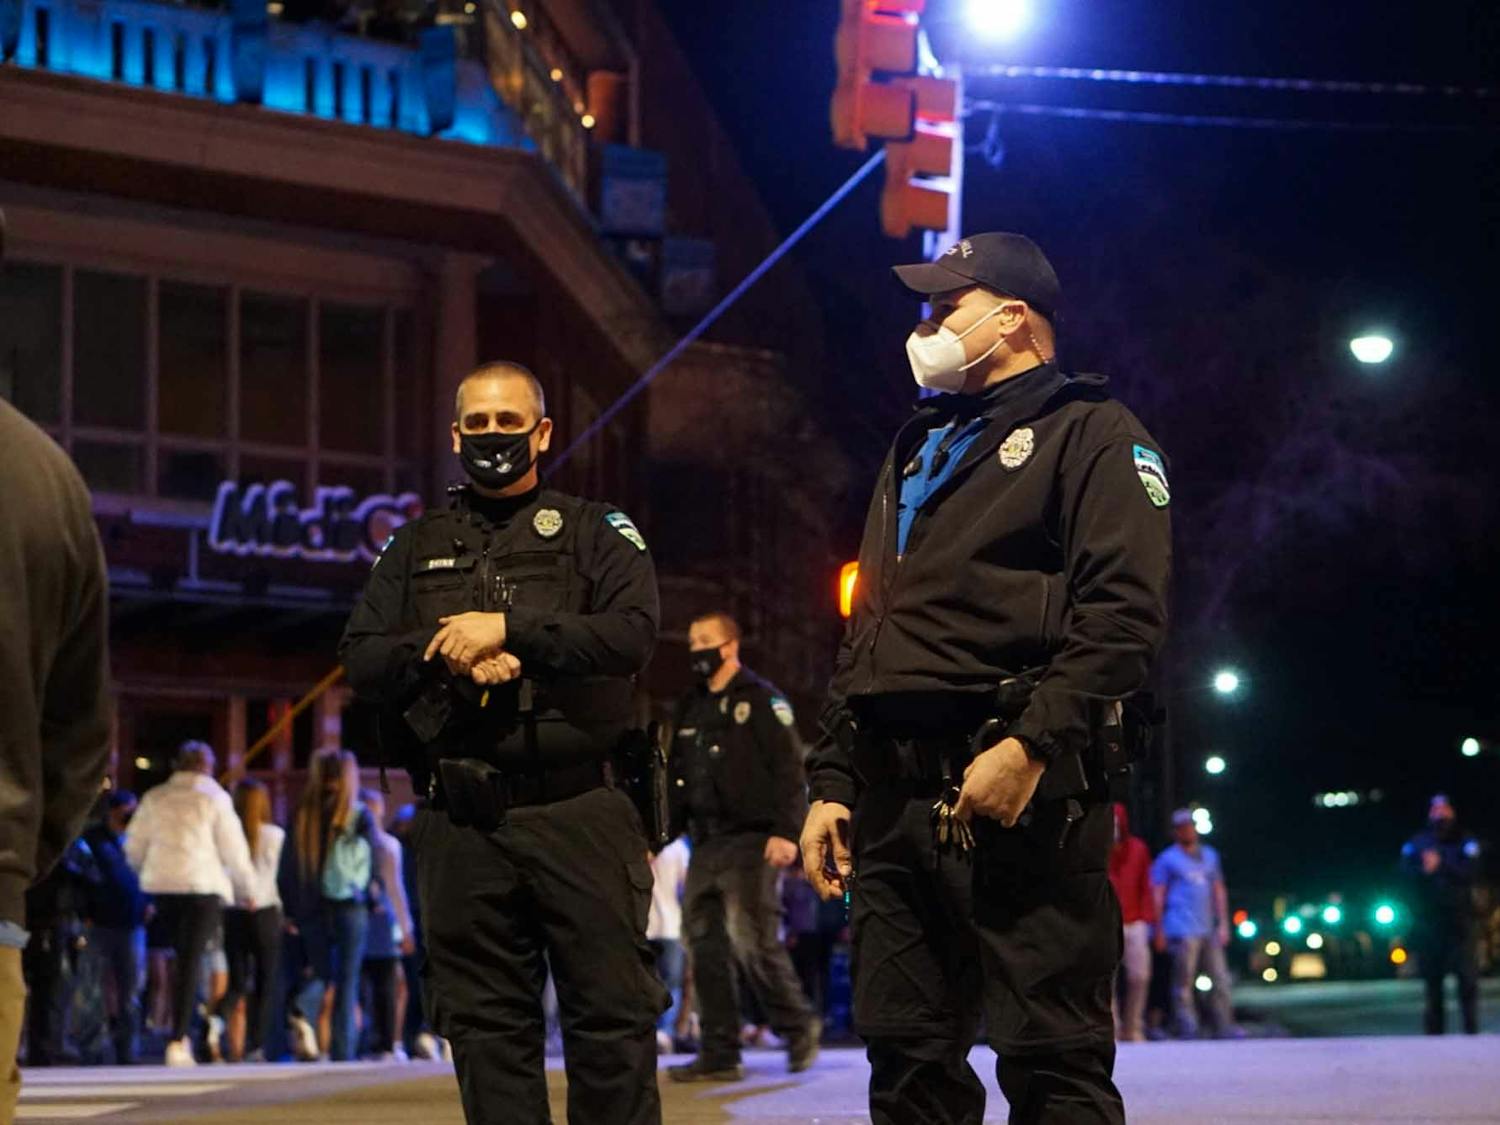 Chapel Hill police are stationed on Franklin Street during the UNC vs Duke basketball game on March 5, 2021. Police were present in an attempt to prevent students from rushing Franklin Street.